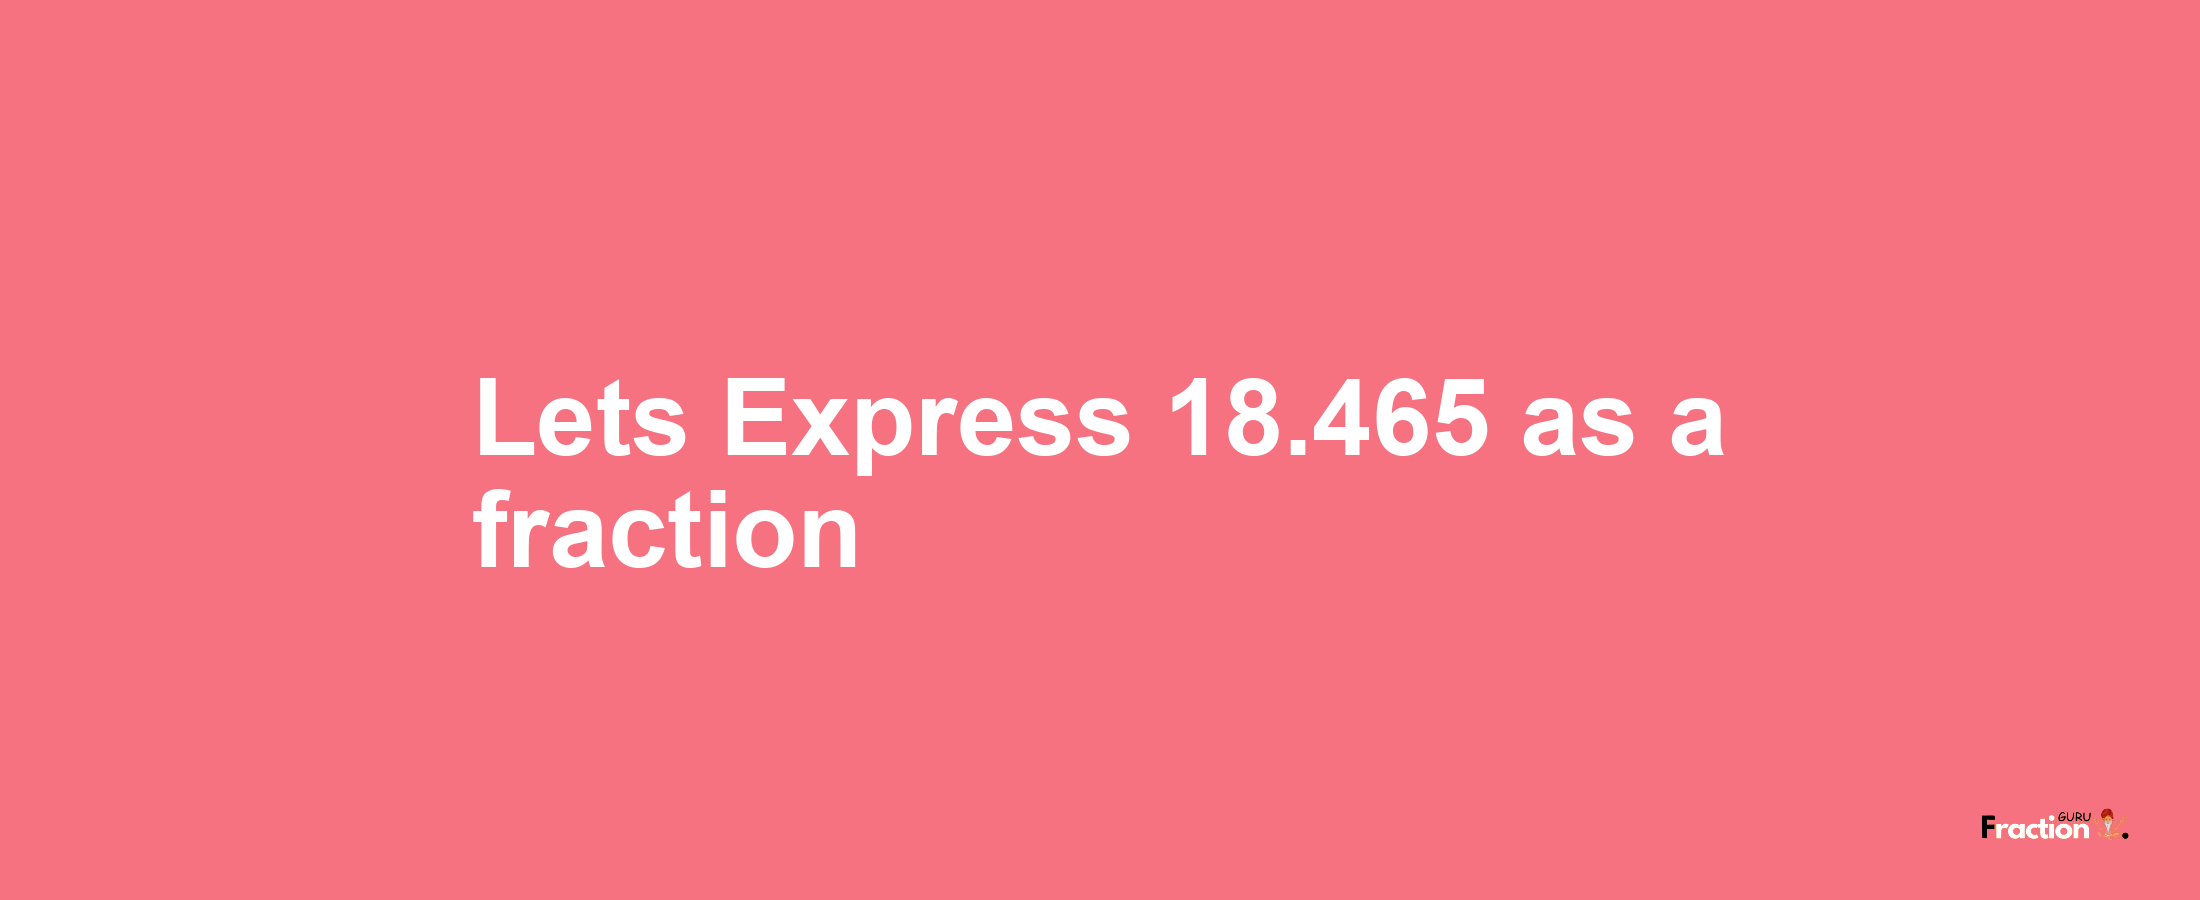 Lets Express 18.465 as afraction